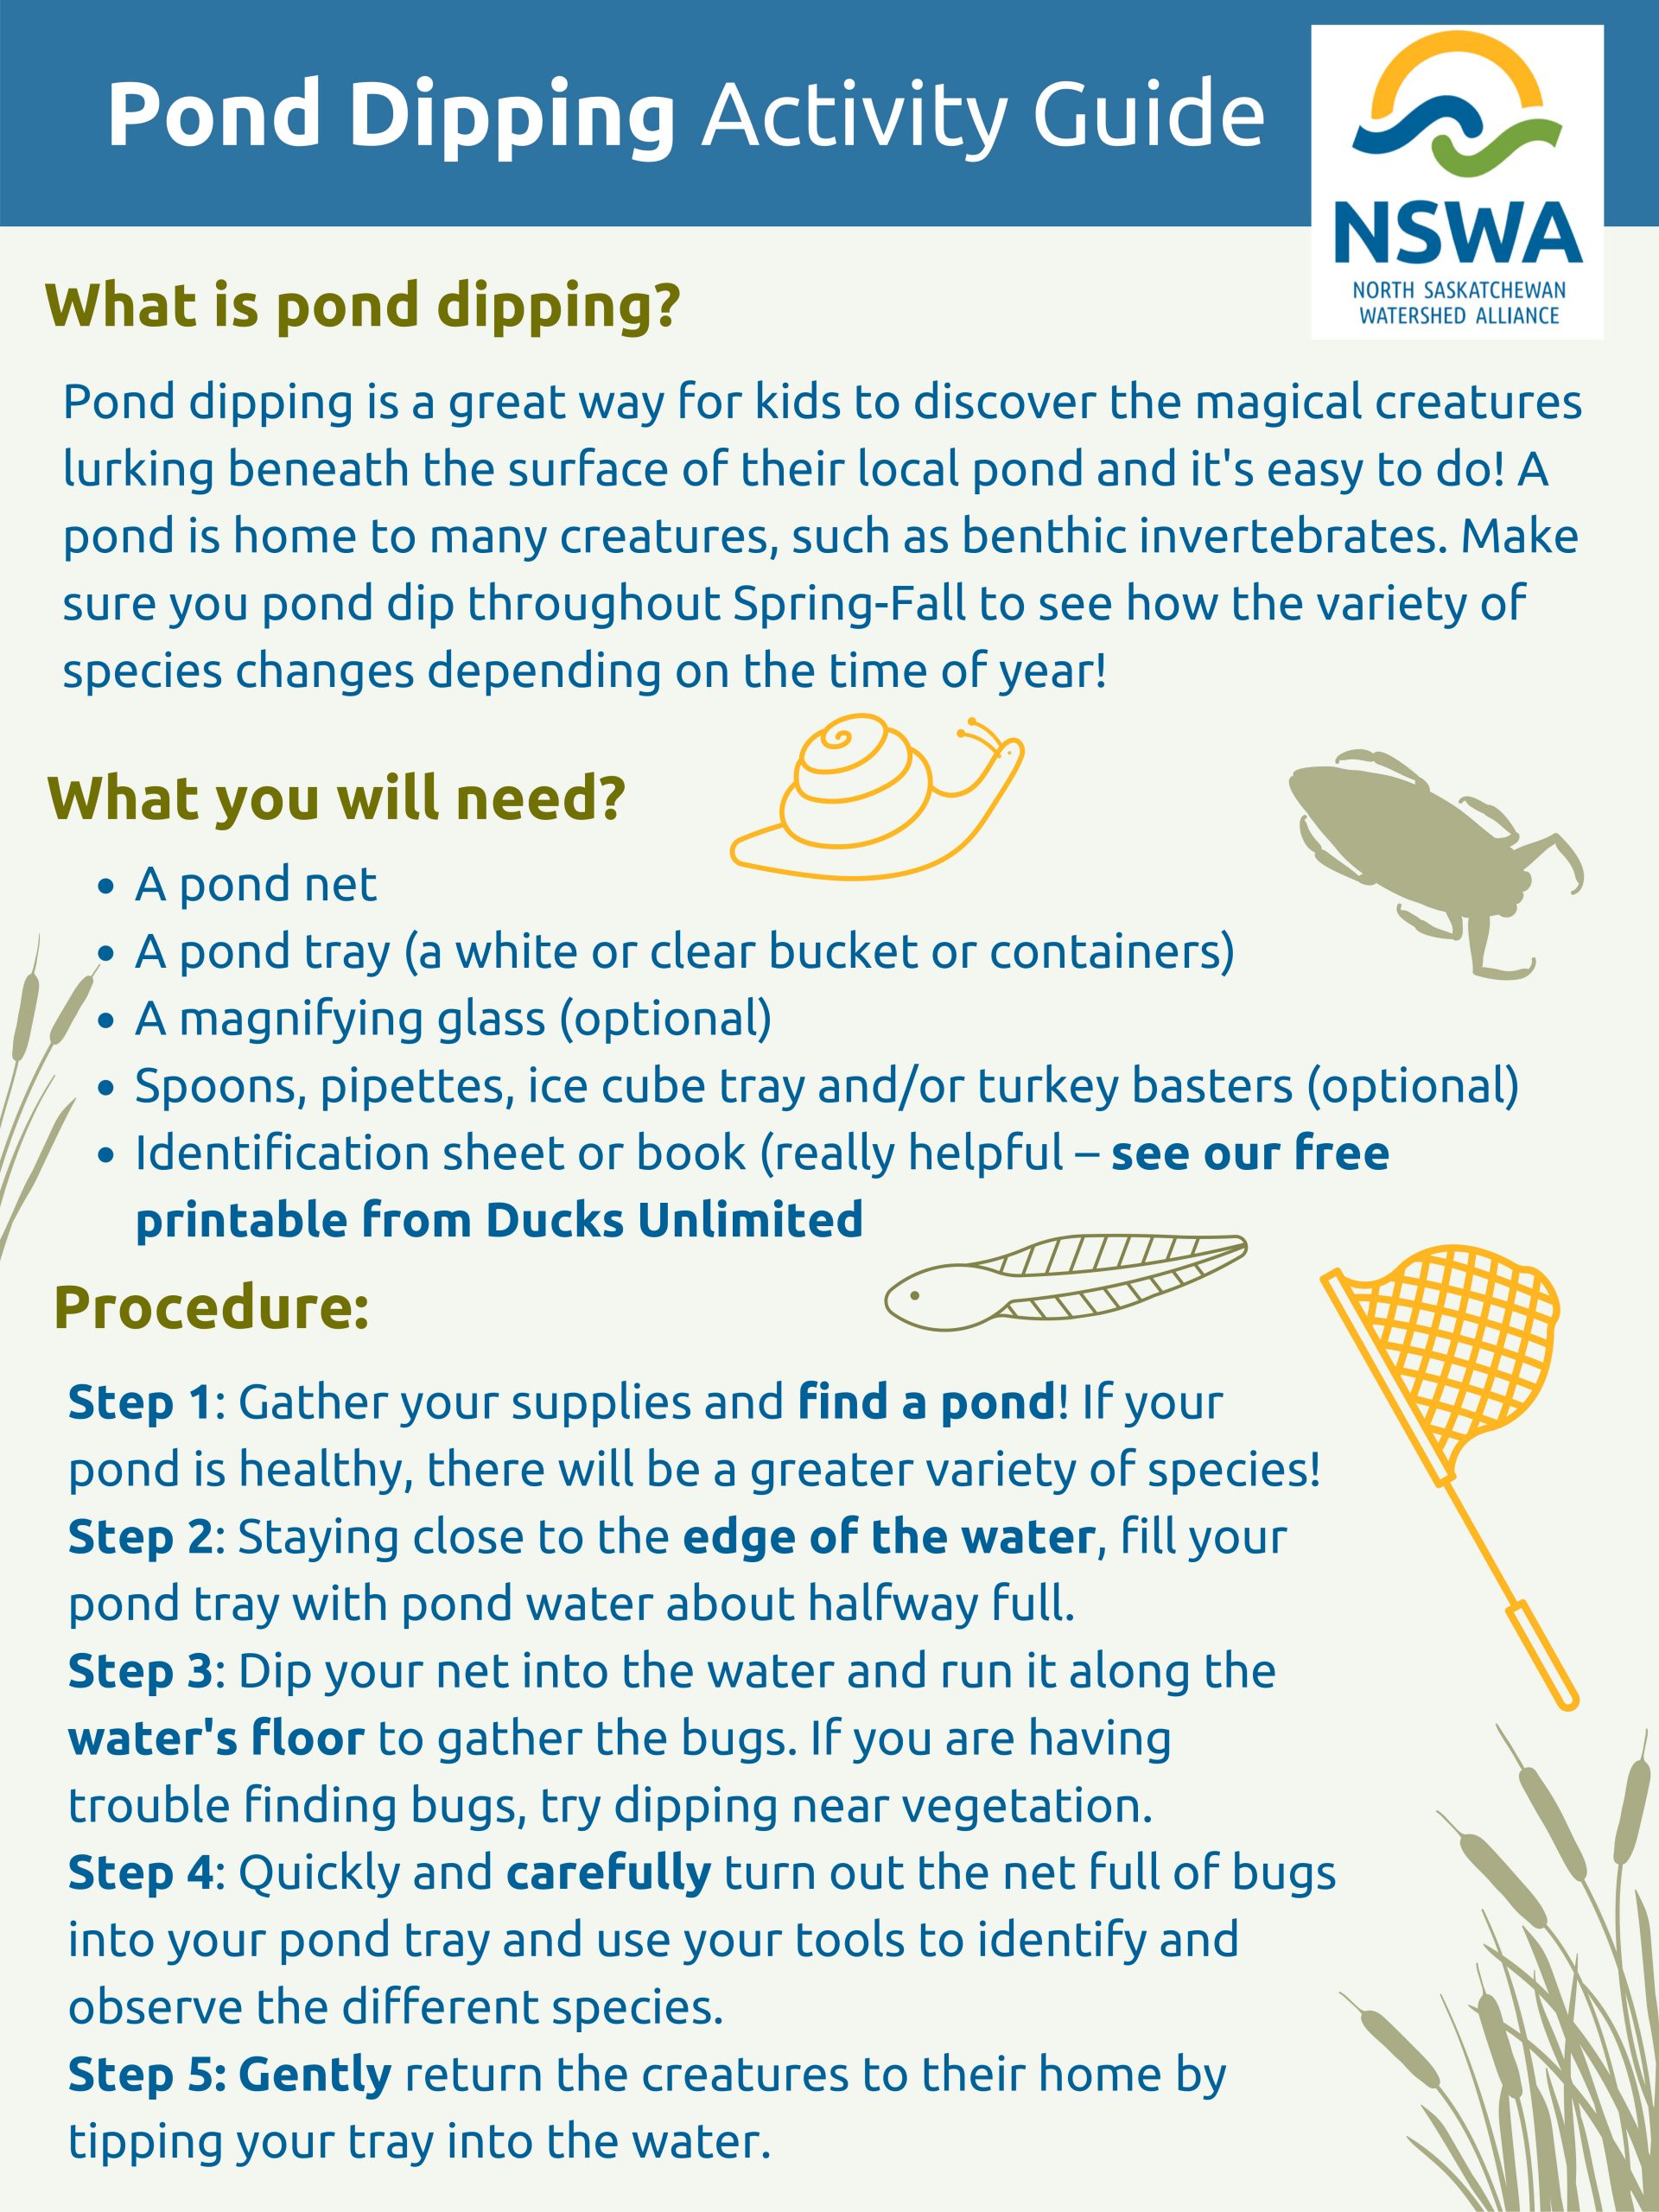 Pond Dipping Activity Guide